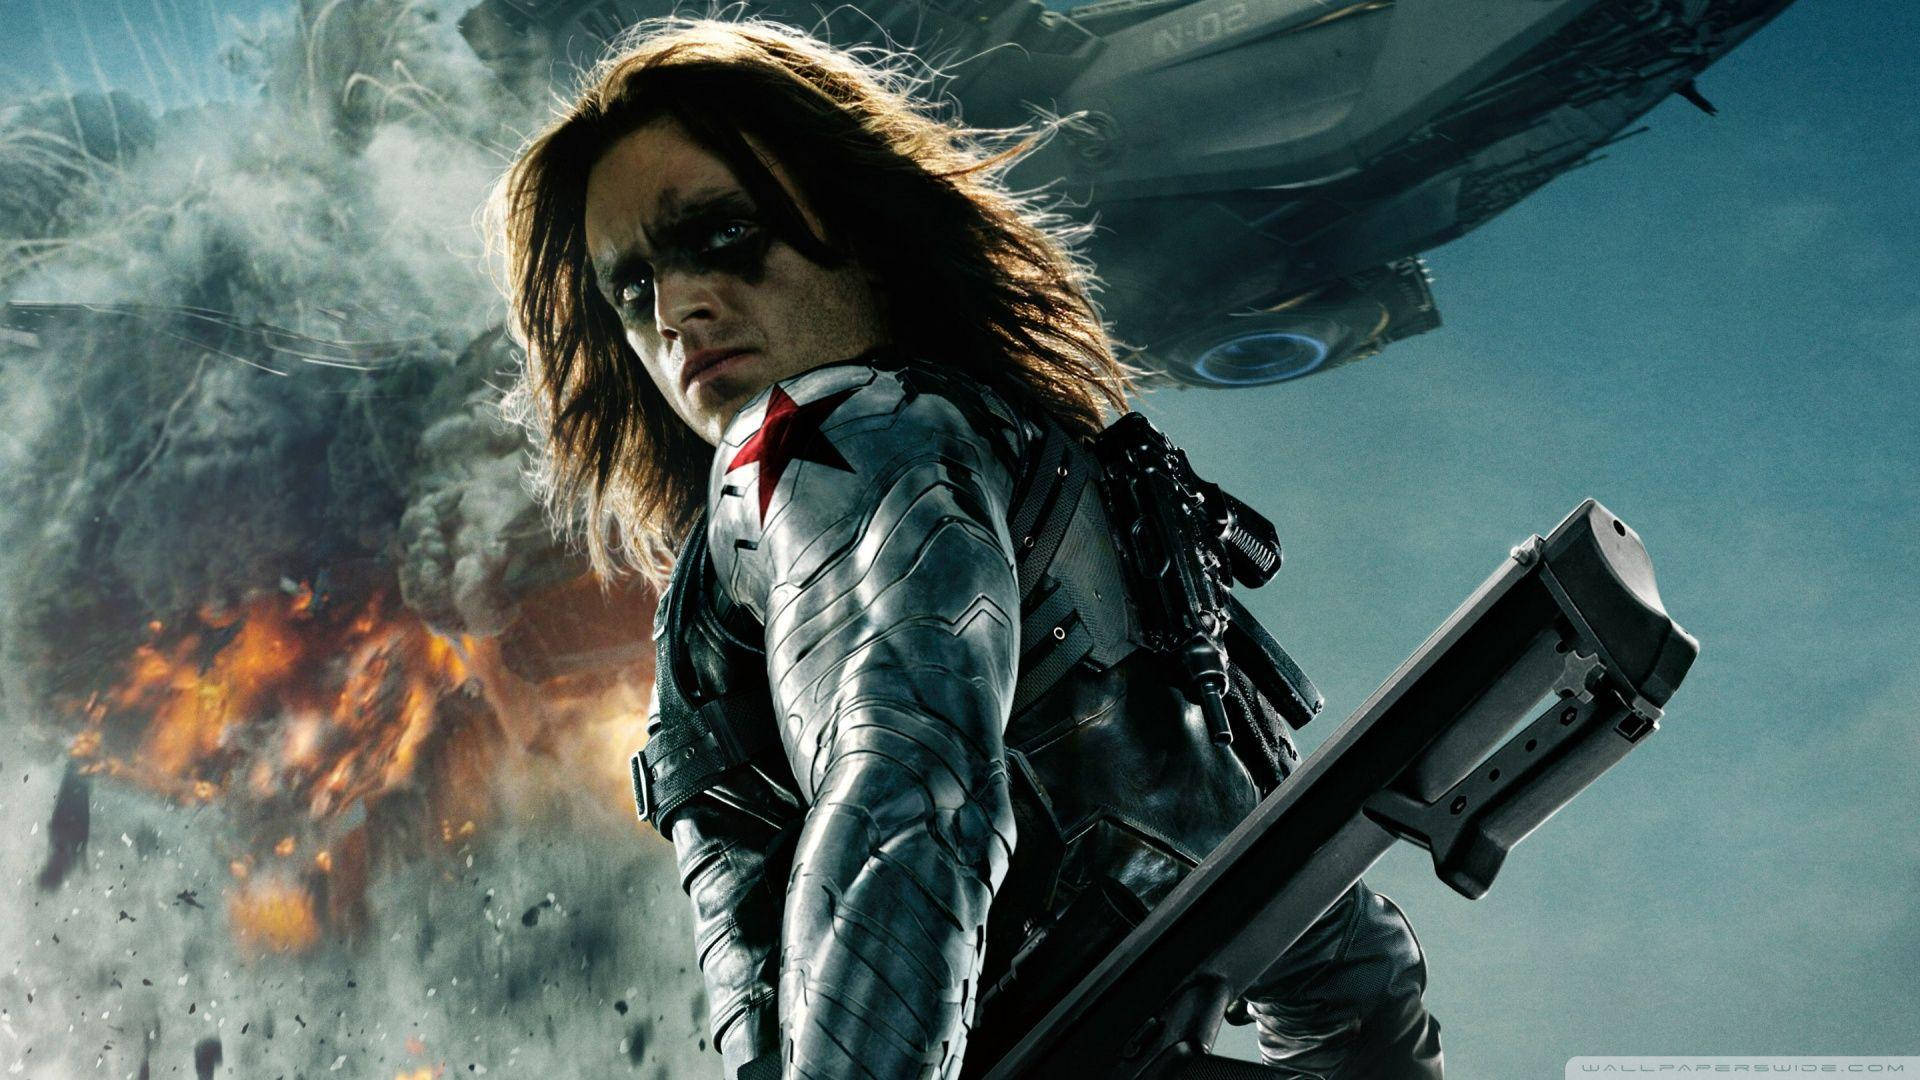 Bucky Barnes, Known By His Winter Soldier Identity, Stares Off Into The Horizon. Background